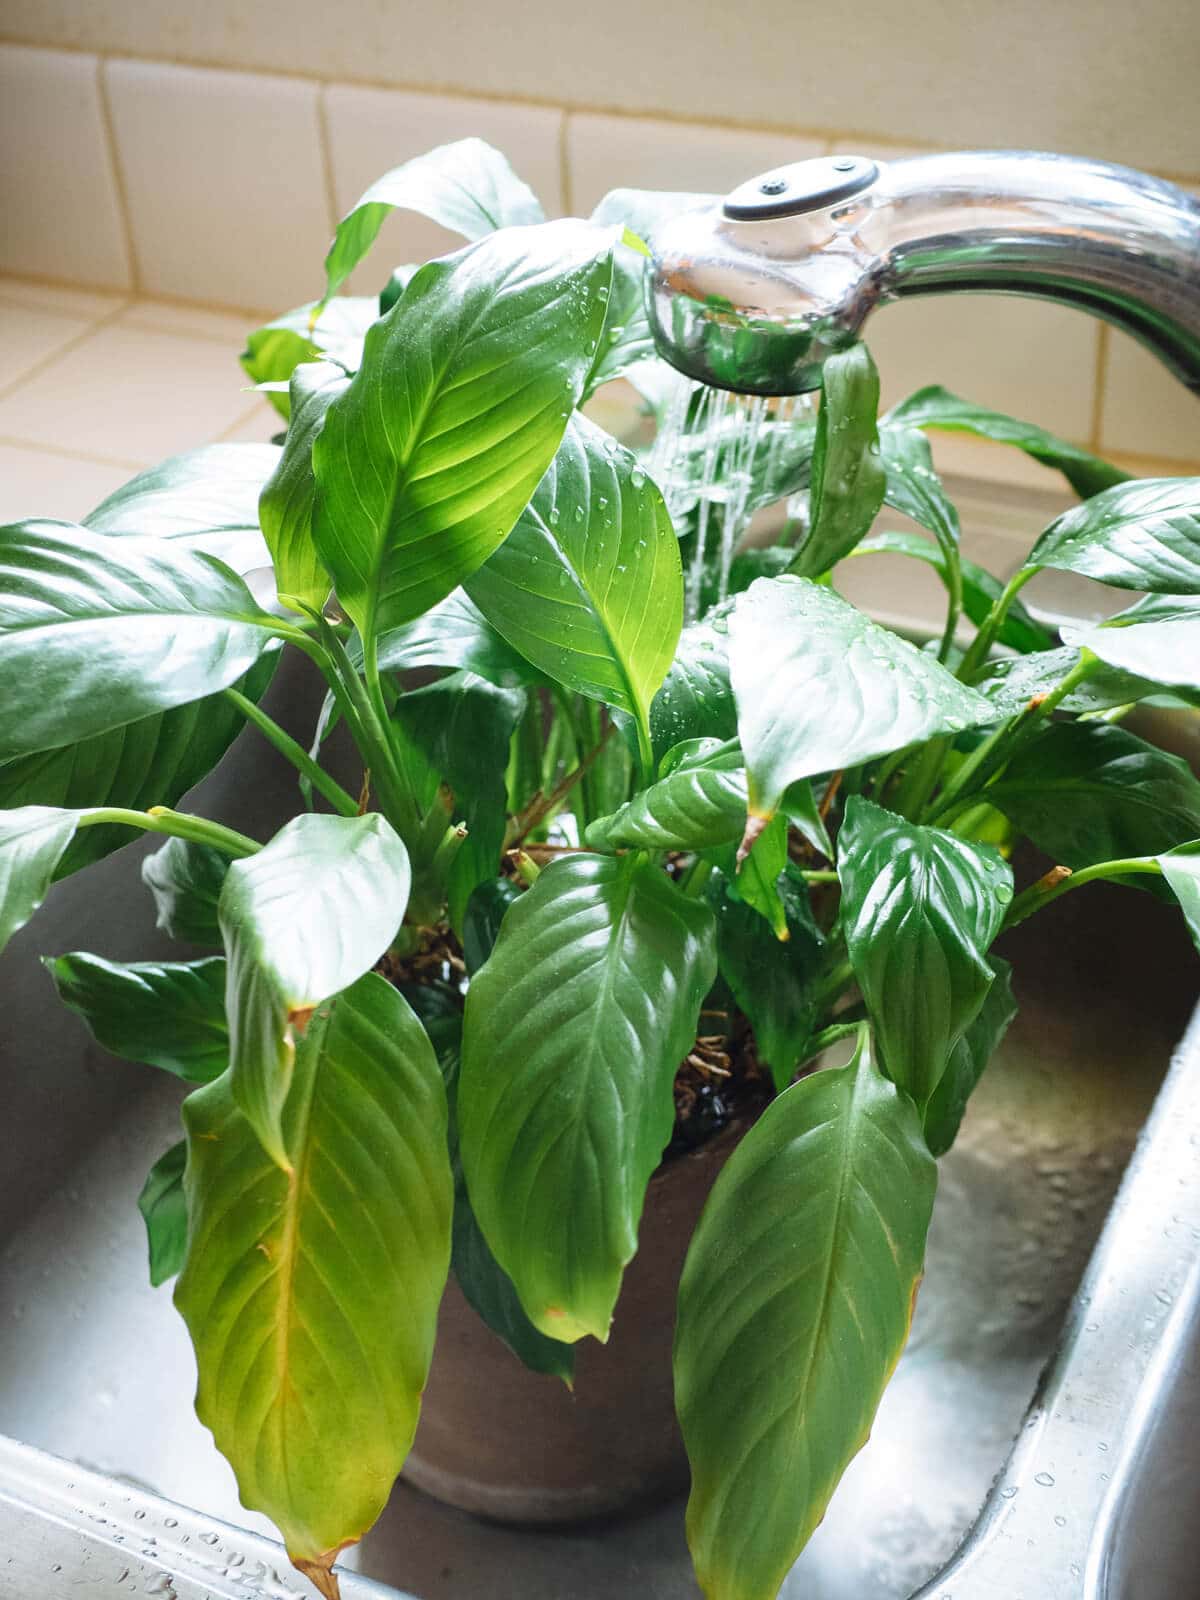 Shower your houseplants in the sink or bathtub to remove dust and dirt